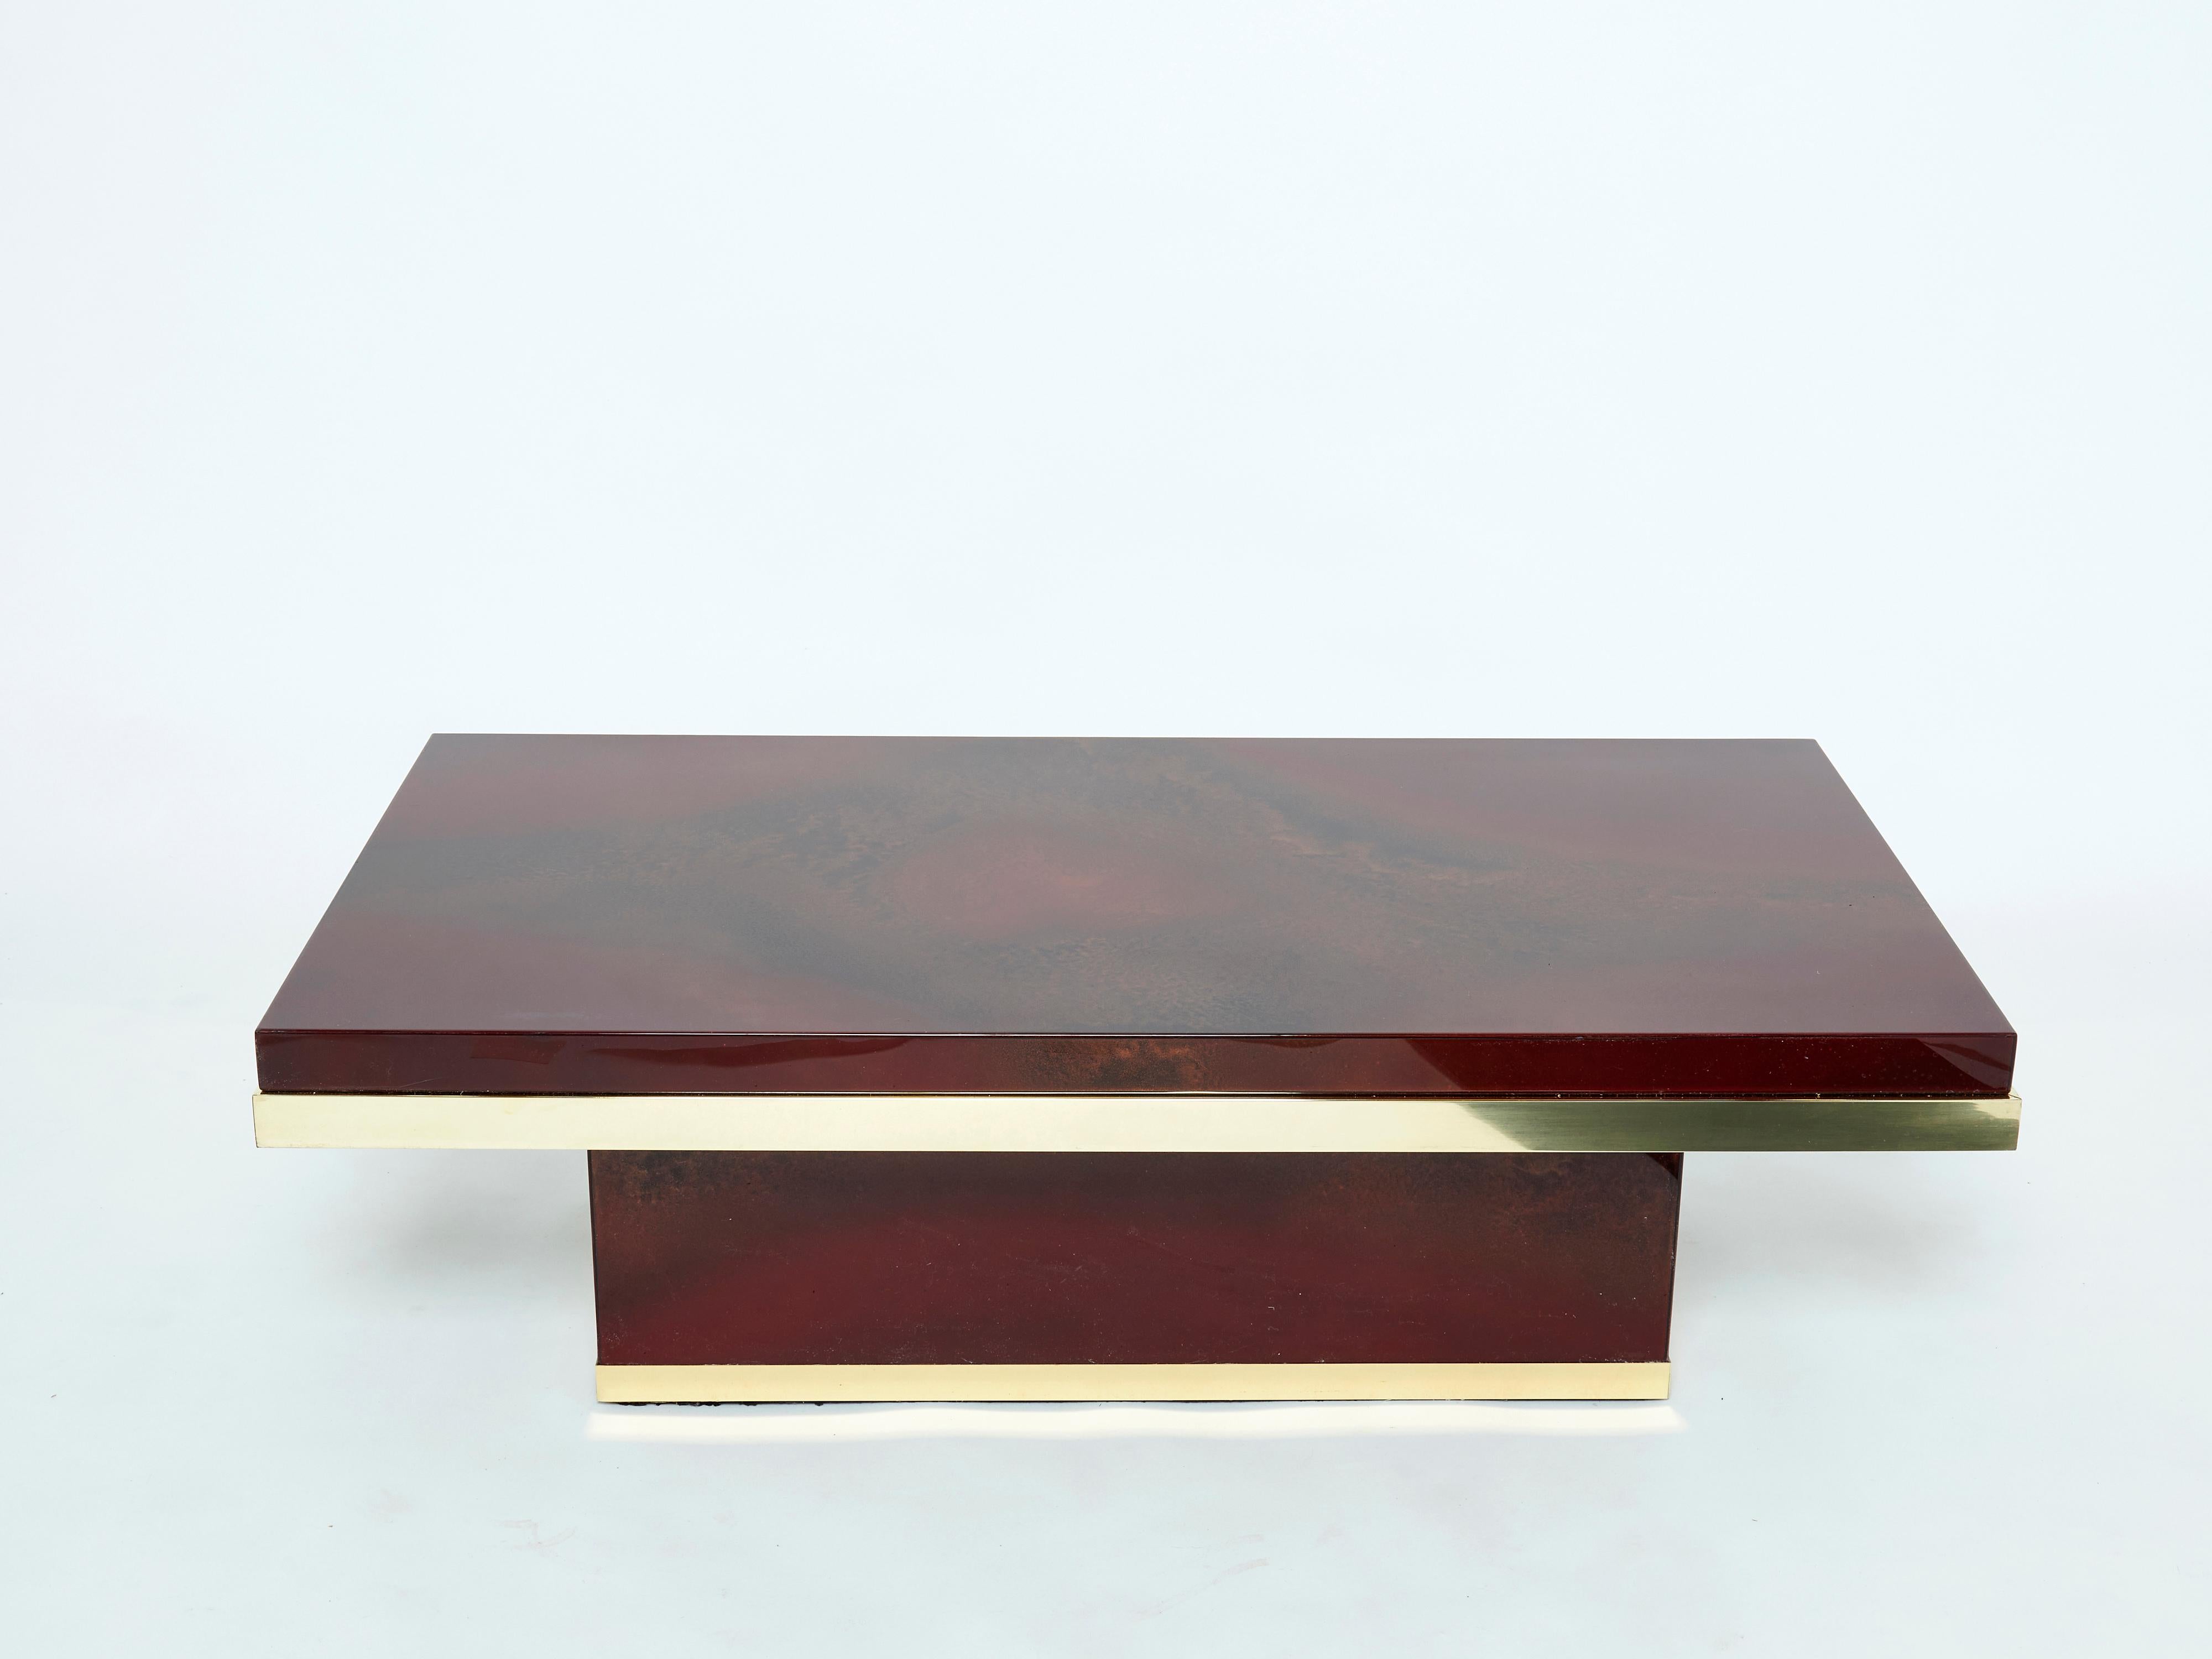 This stunning coffee table is guaranteed to be the focus of attention when you entertain guests in your living room. Following the glamorous mid-century look of other classic Jean Claude Mahey designs, the gleaming bronze and cherry red lacquered